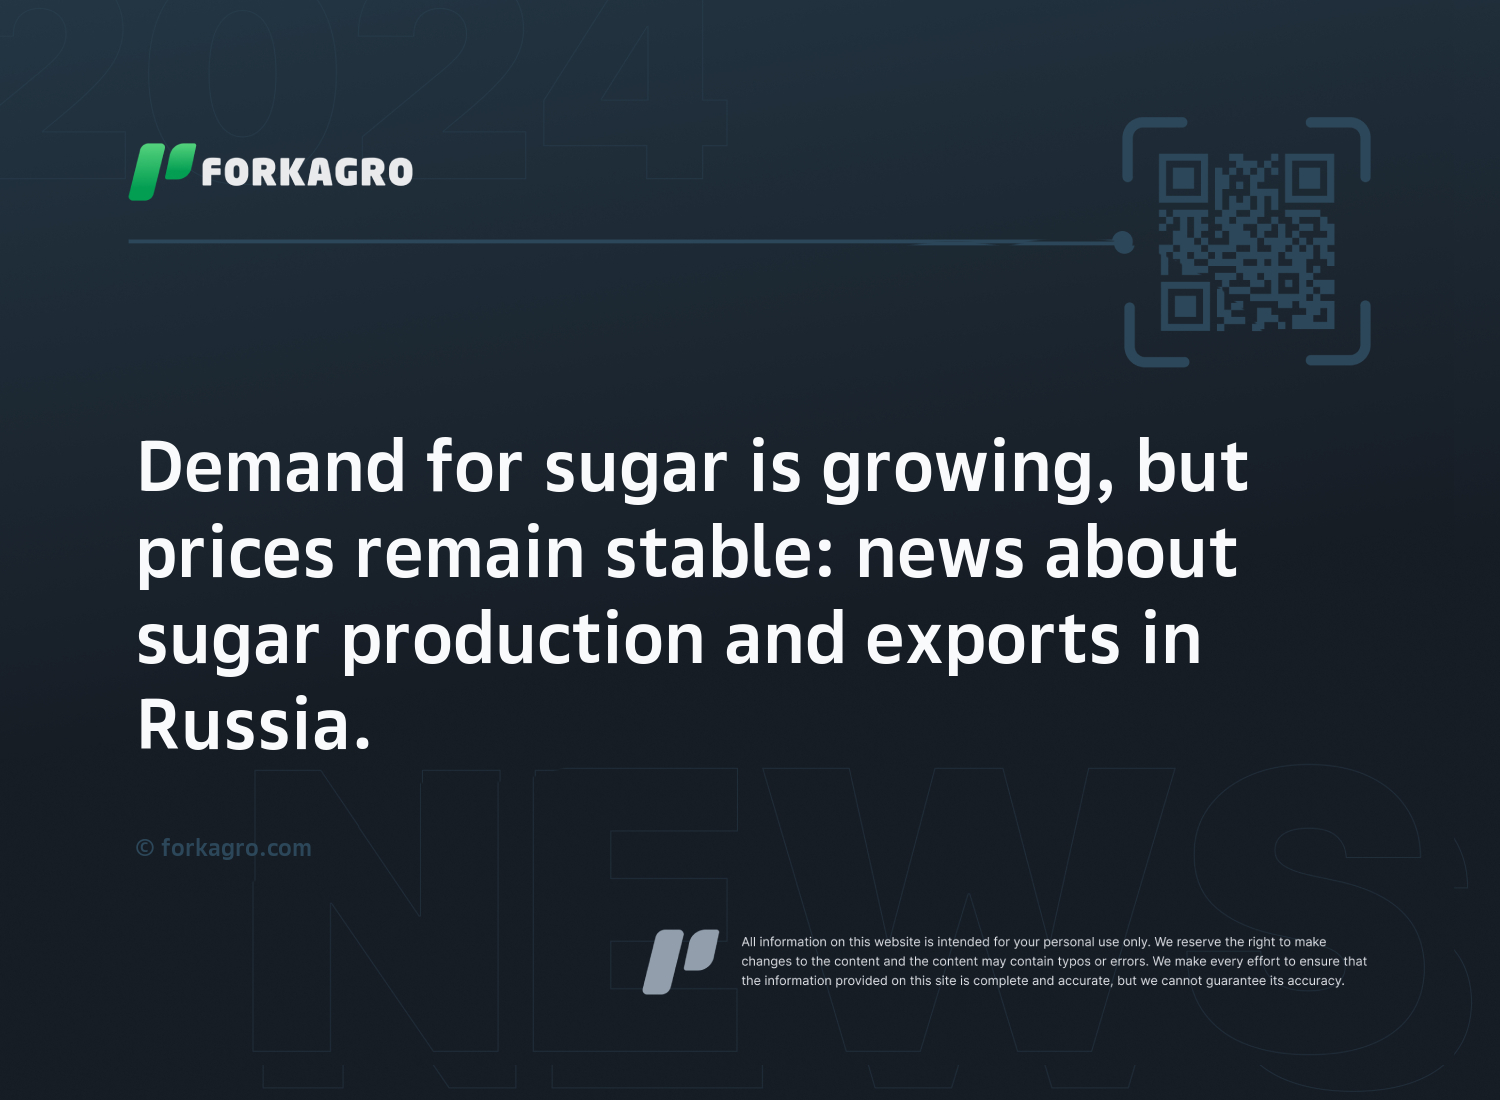 Demand for sugar is growing, but prices remain stable: news about sugar production and exports in Russia.